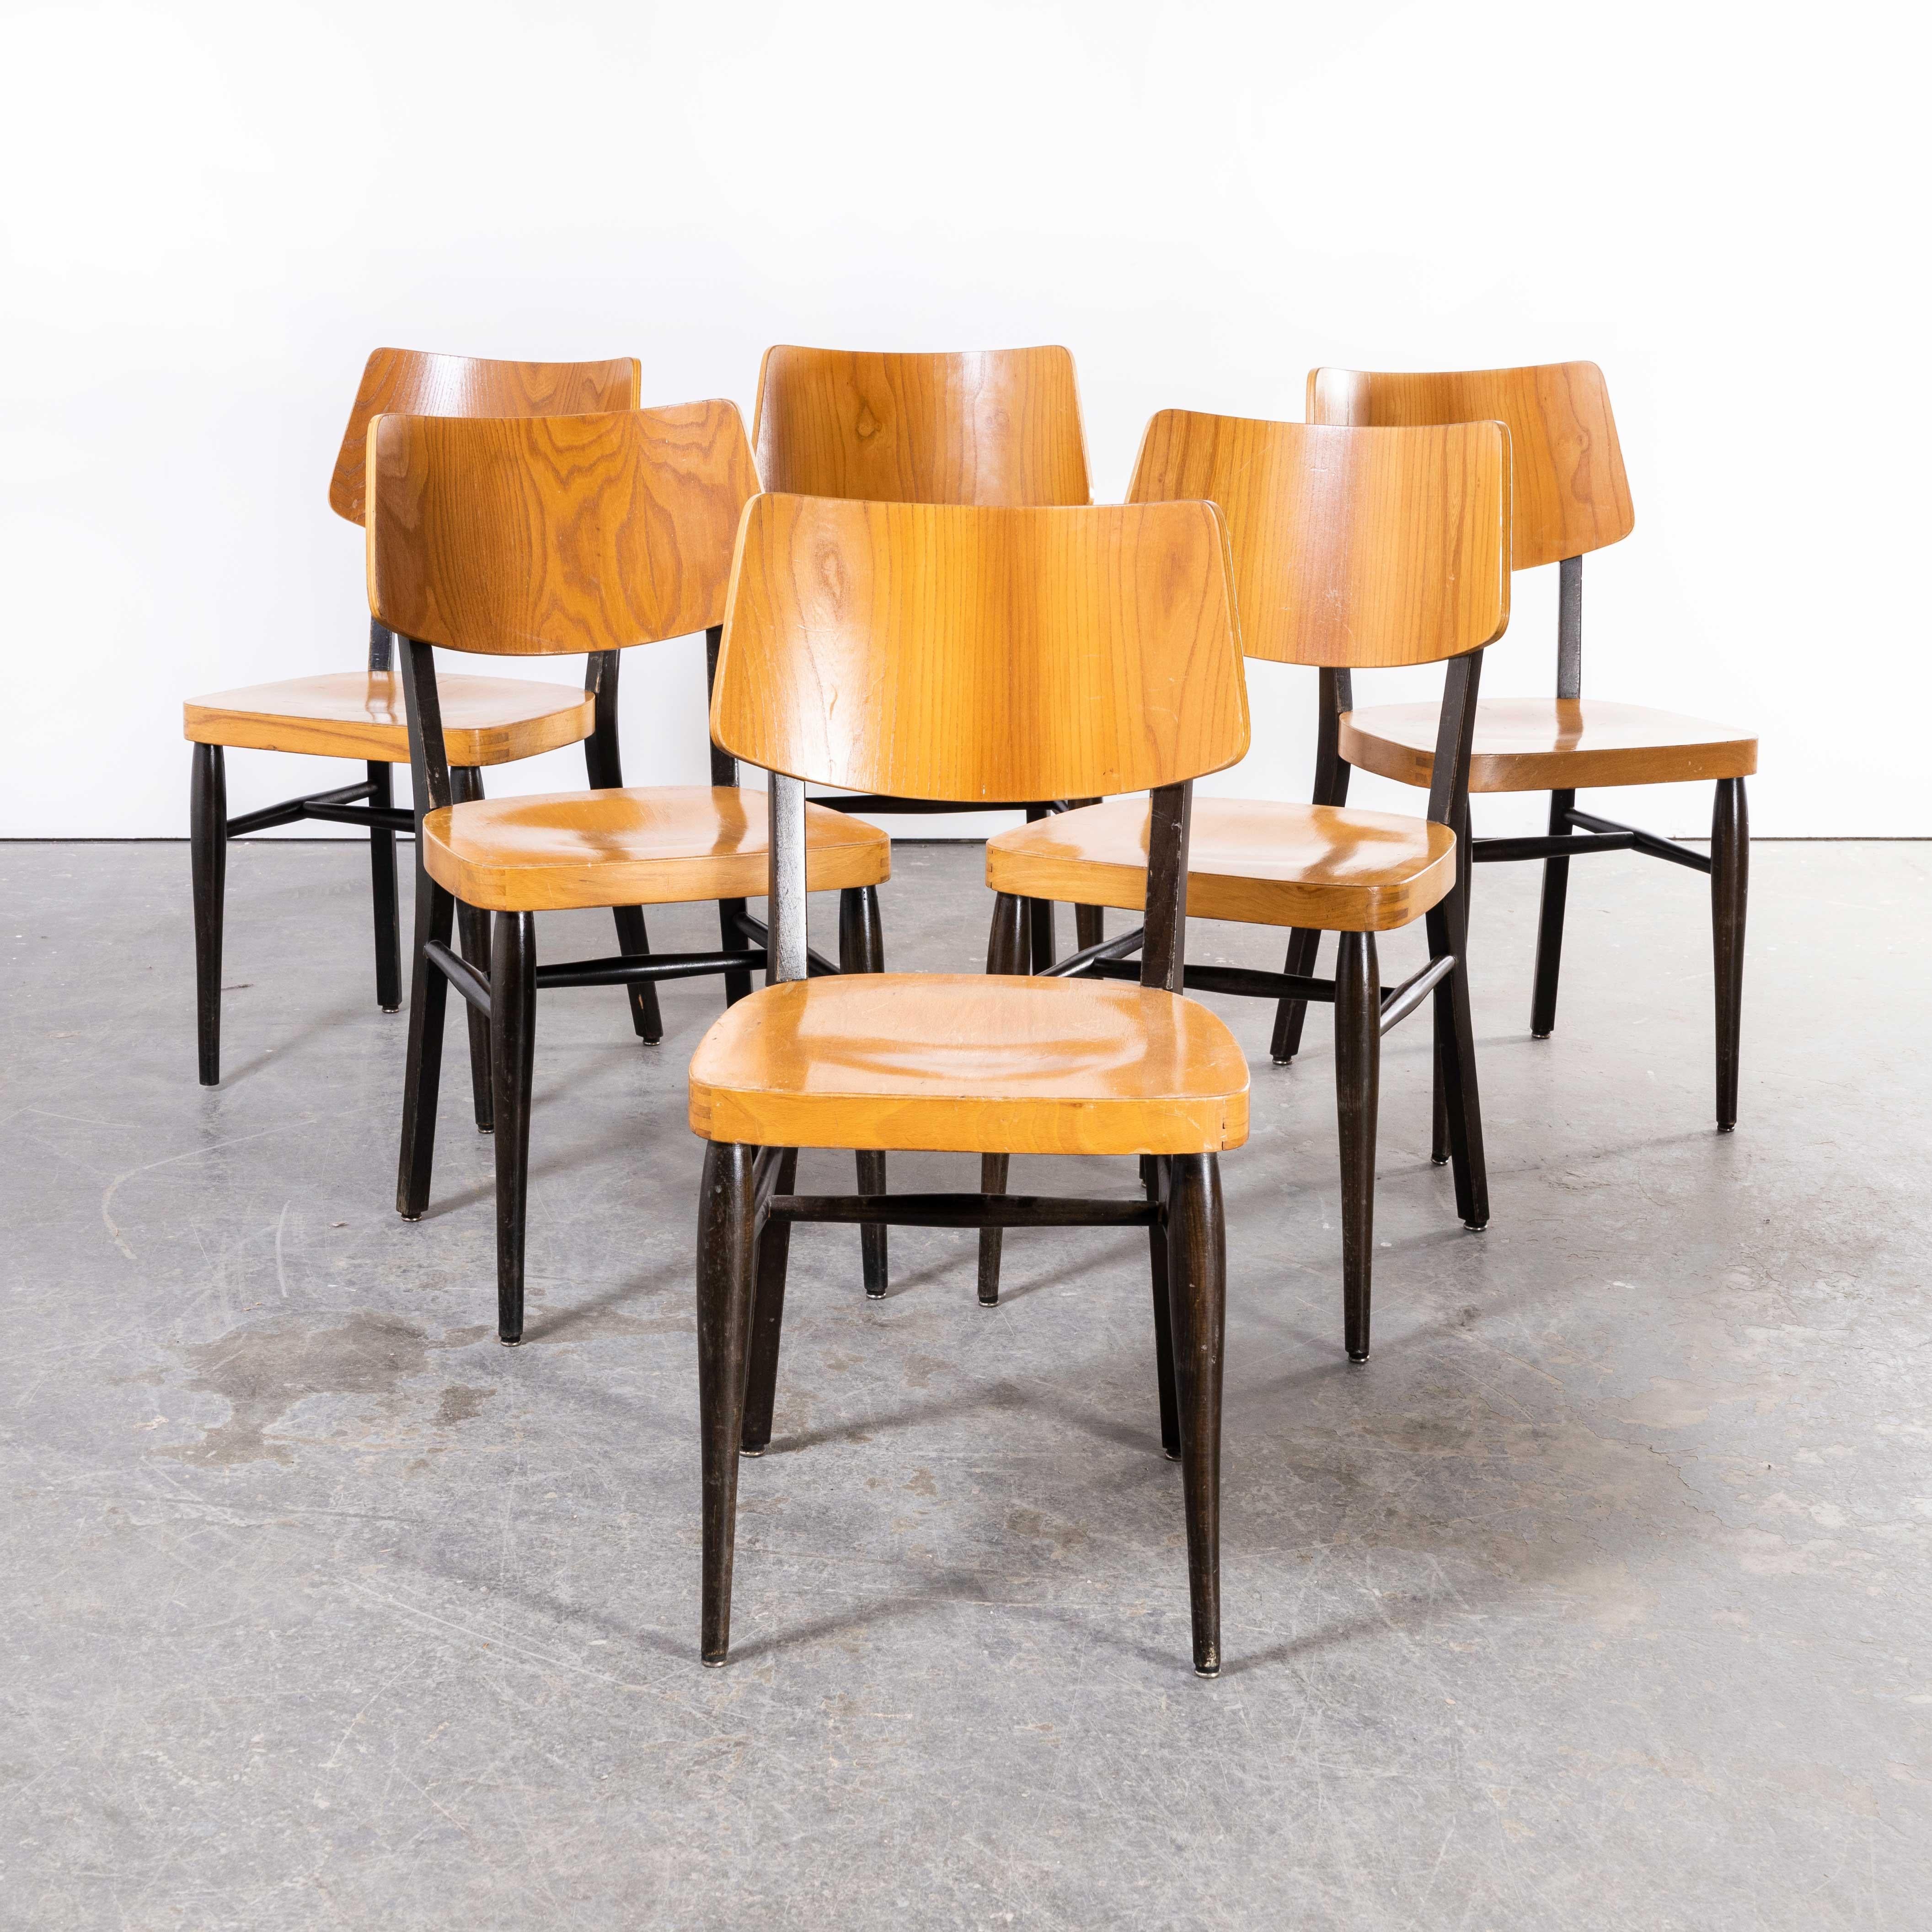 1970s Two tone saddle back dining chair – set of six
1970s Two tone saddle back dining chair – set of six. Sourced in central Germany we loved these chairs for their wide sculptural contemporary backs and two tone ebonized frames and oak seats and